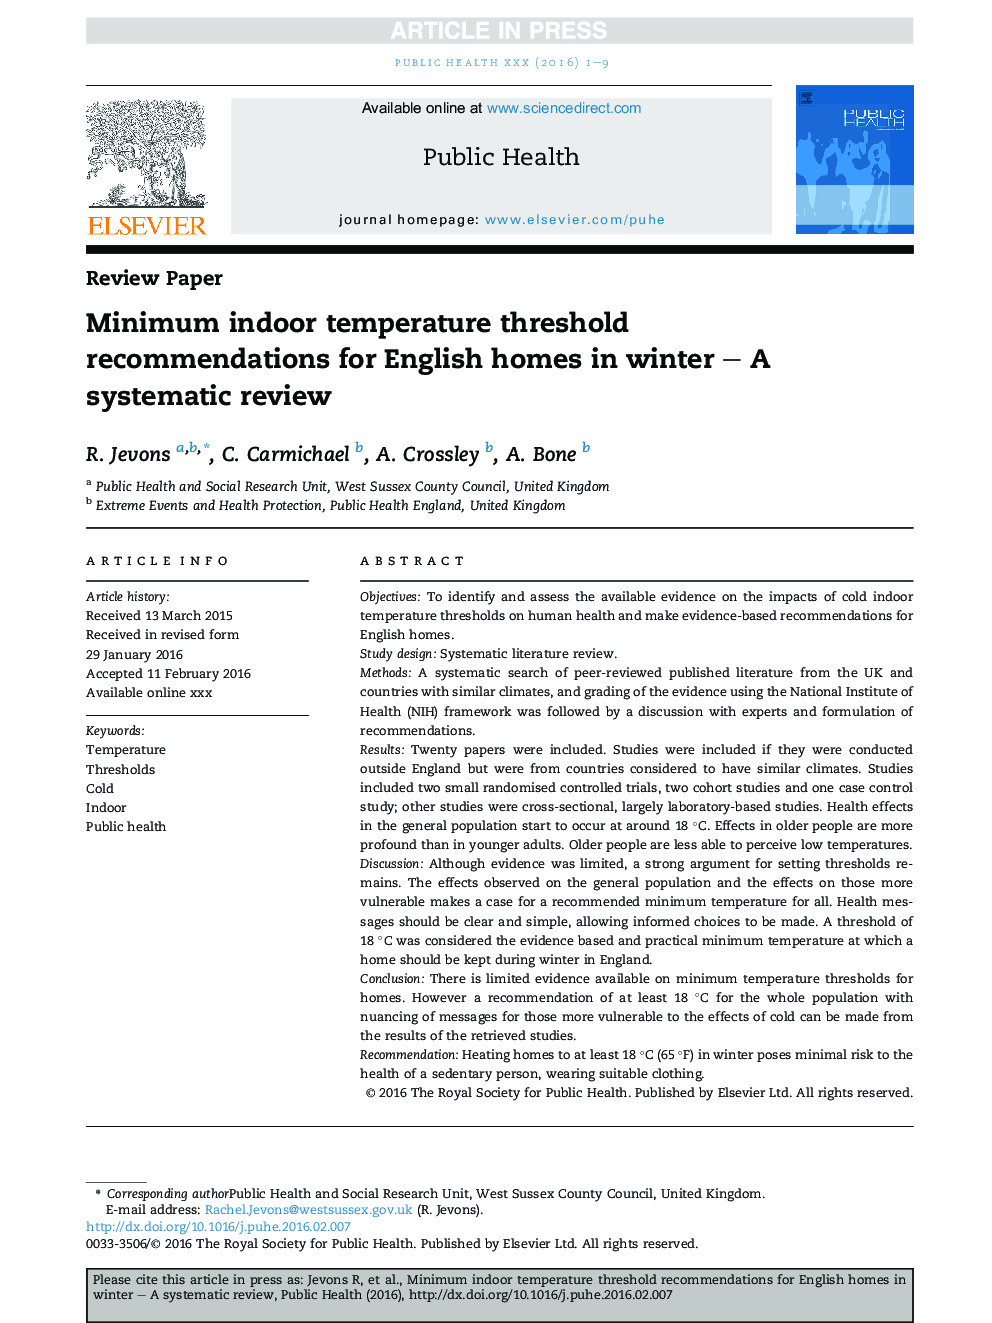 Minimum indoor temperature threshold recommendations for English homes in winter - A systematic review